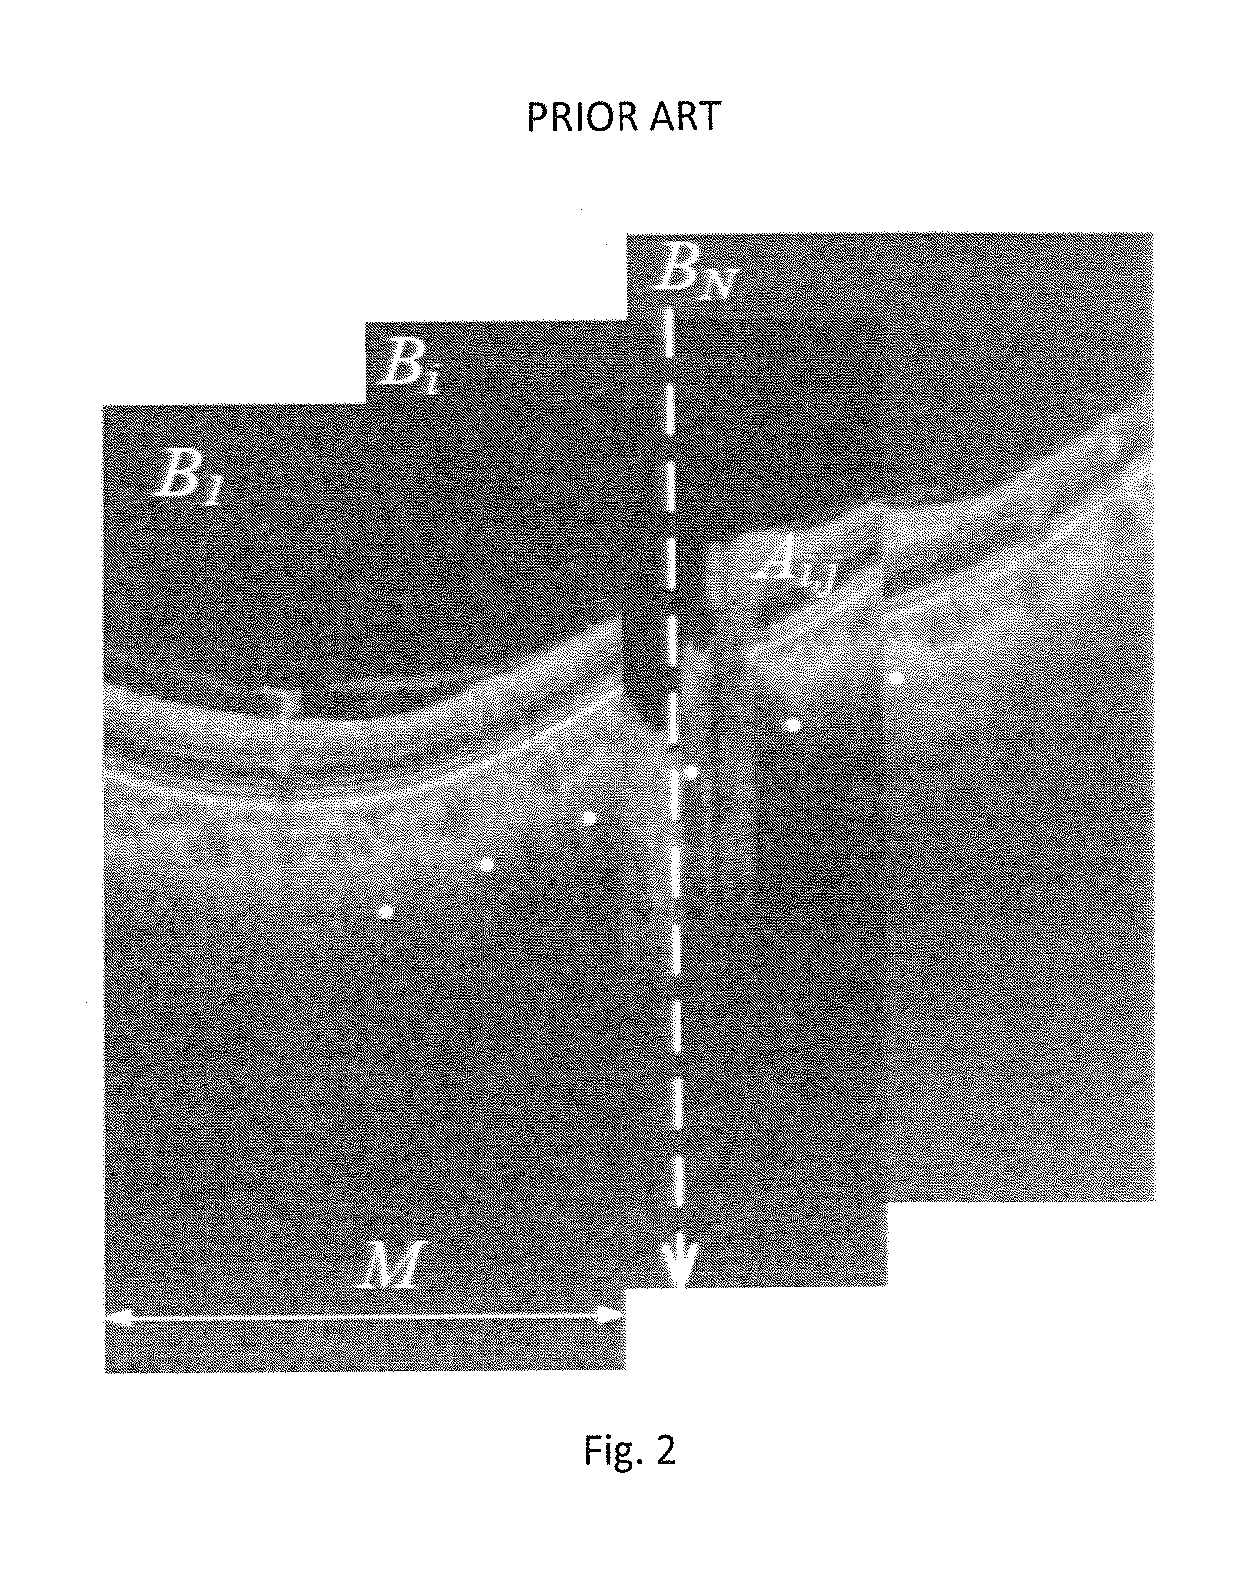 Speckle reduction in optical coherence tomography images